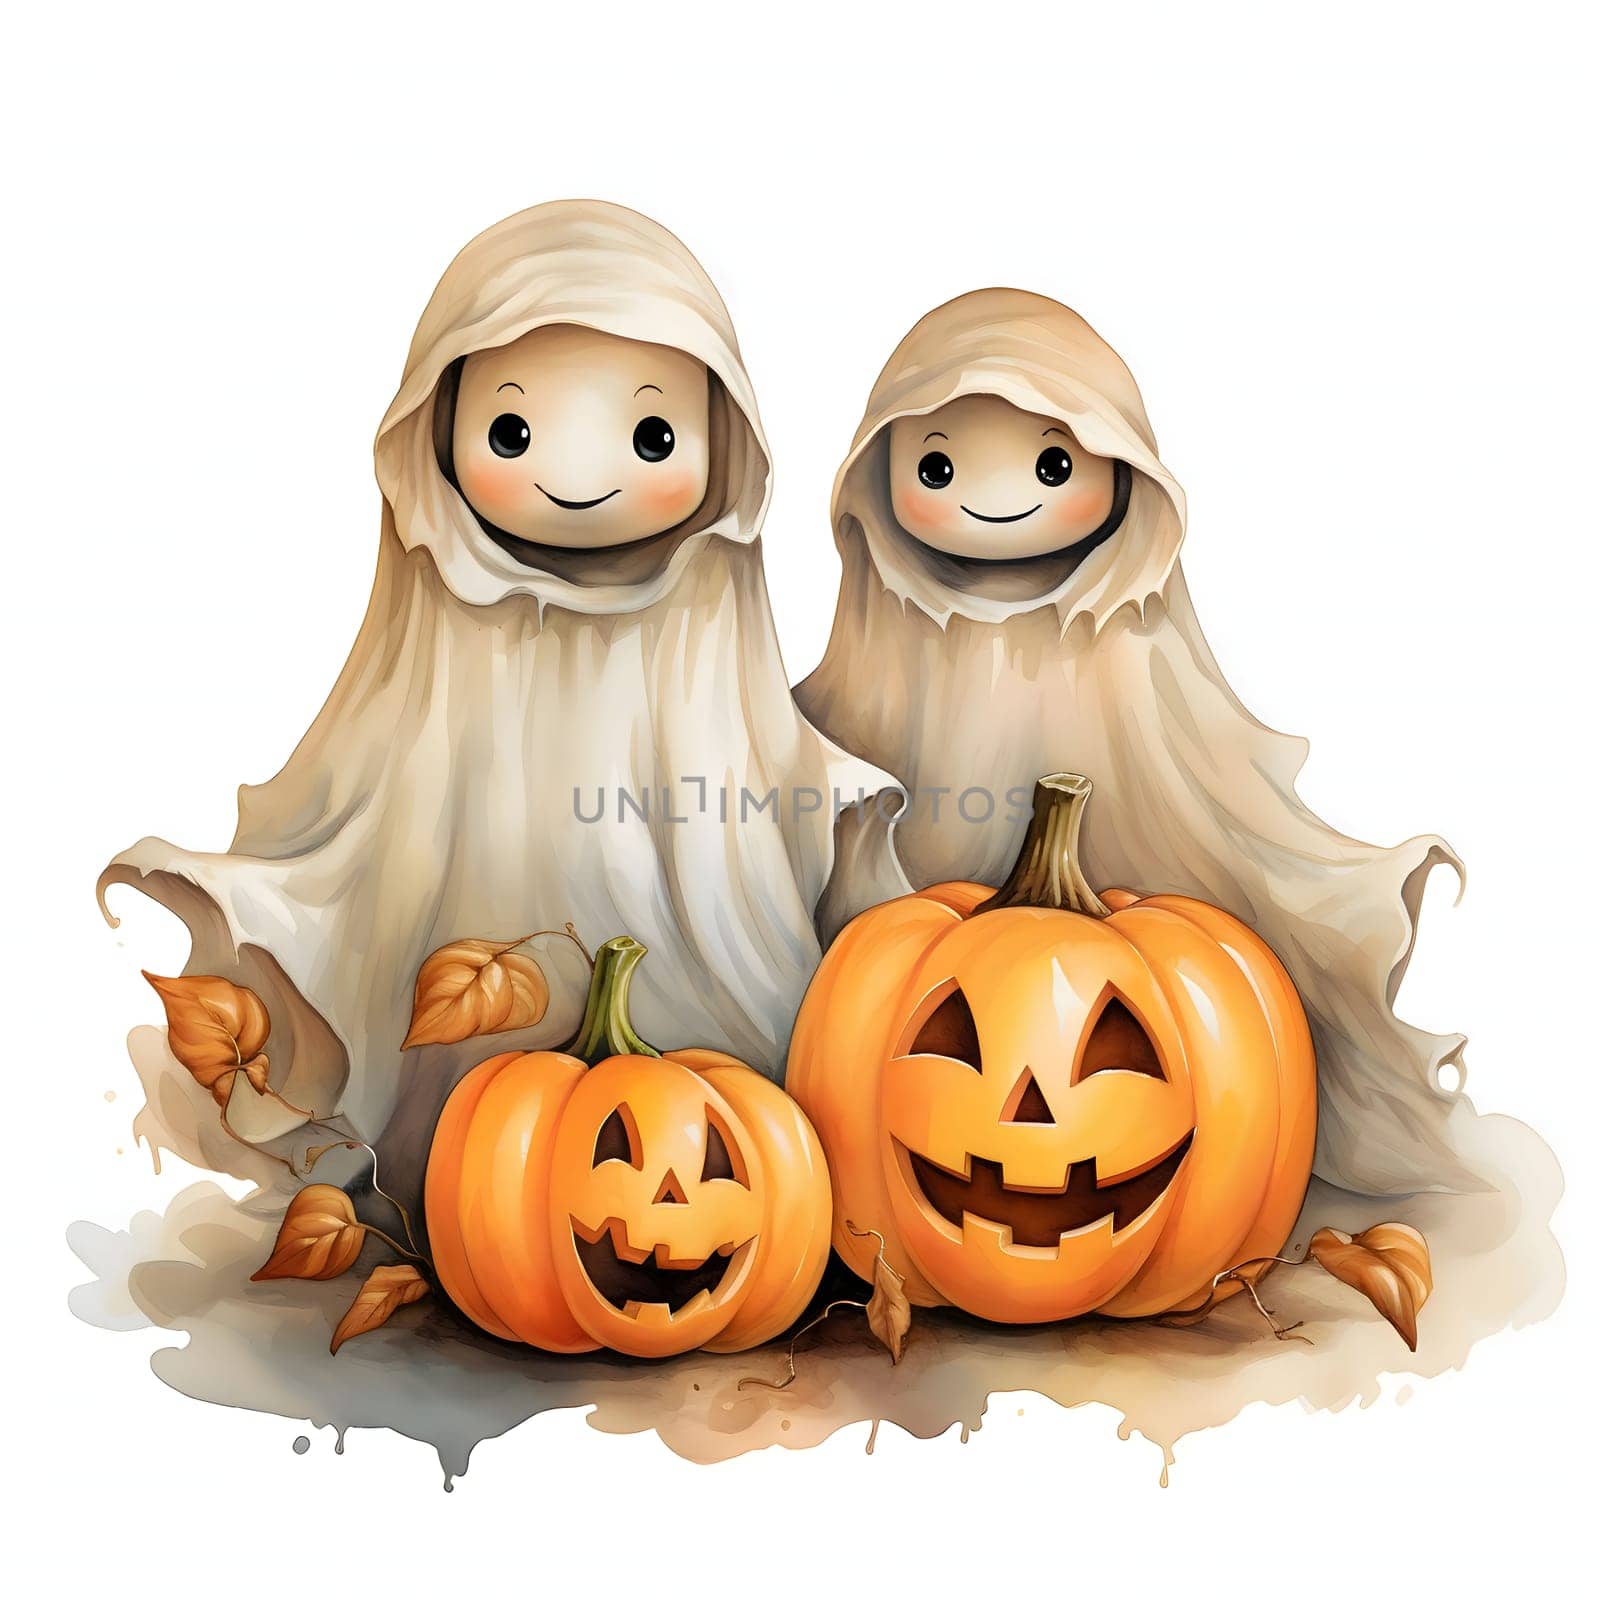 Two smiling ghosts and two jack-o-lantern pumpkins and leaves, Halloween image on a white isolated background. by ThemesS